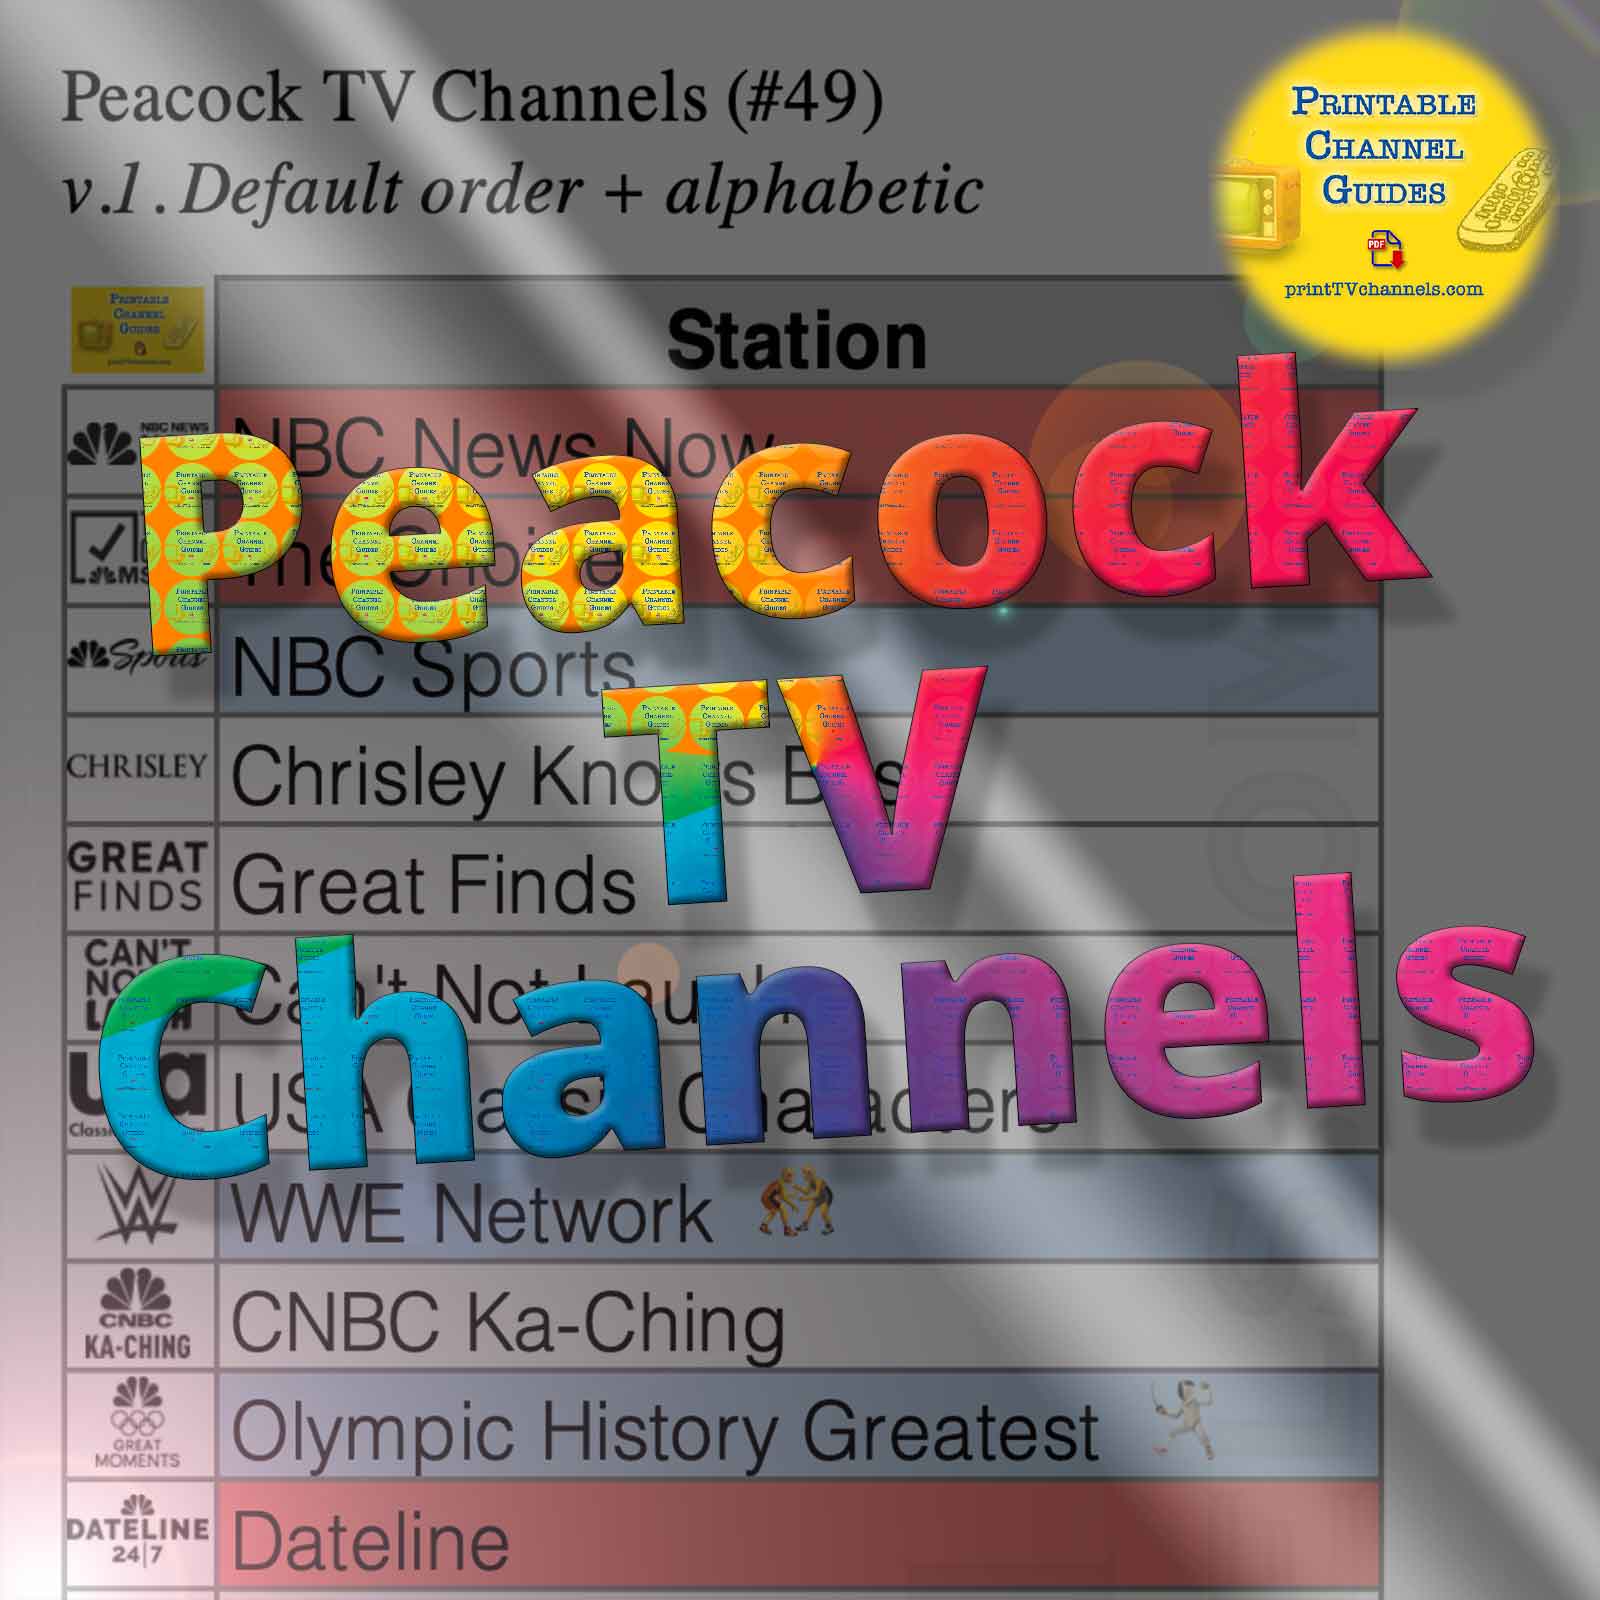 Peacock TV Channels List - Printable TV Channel Guides